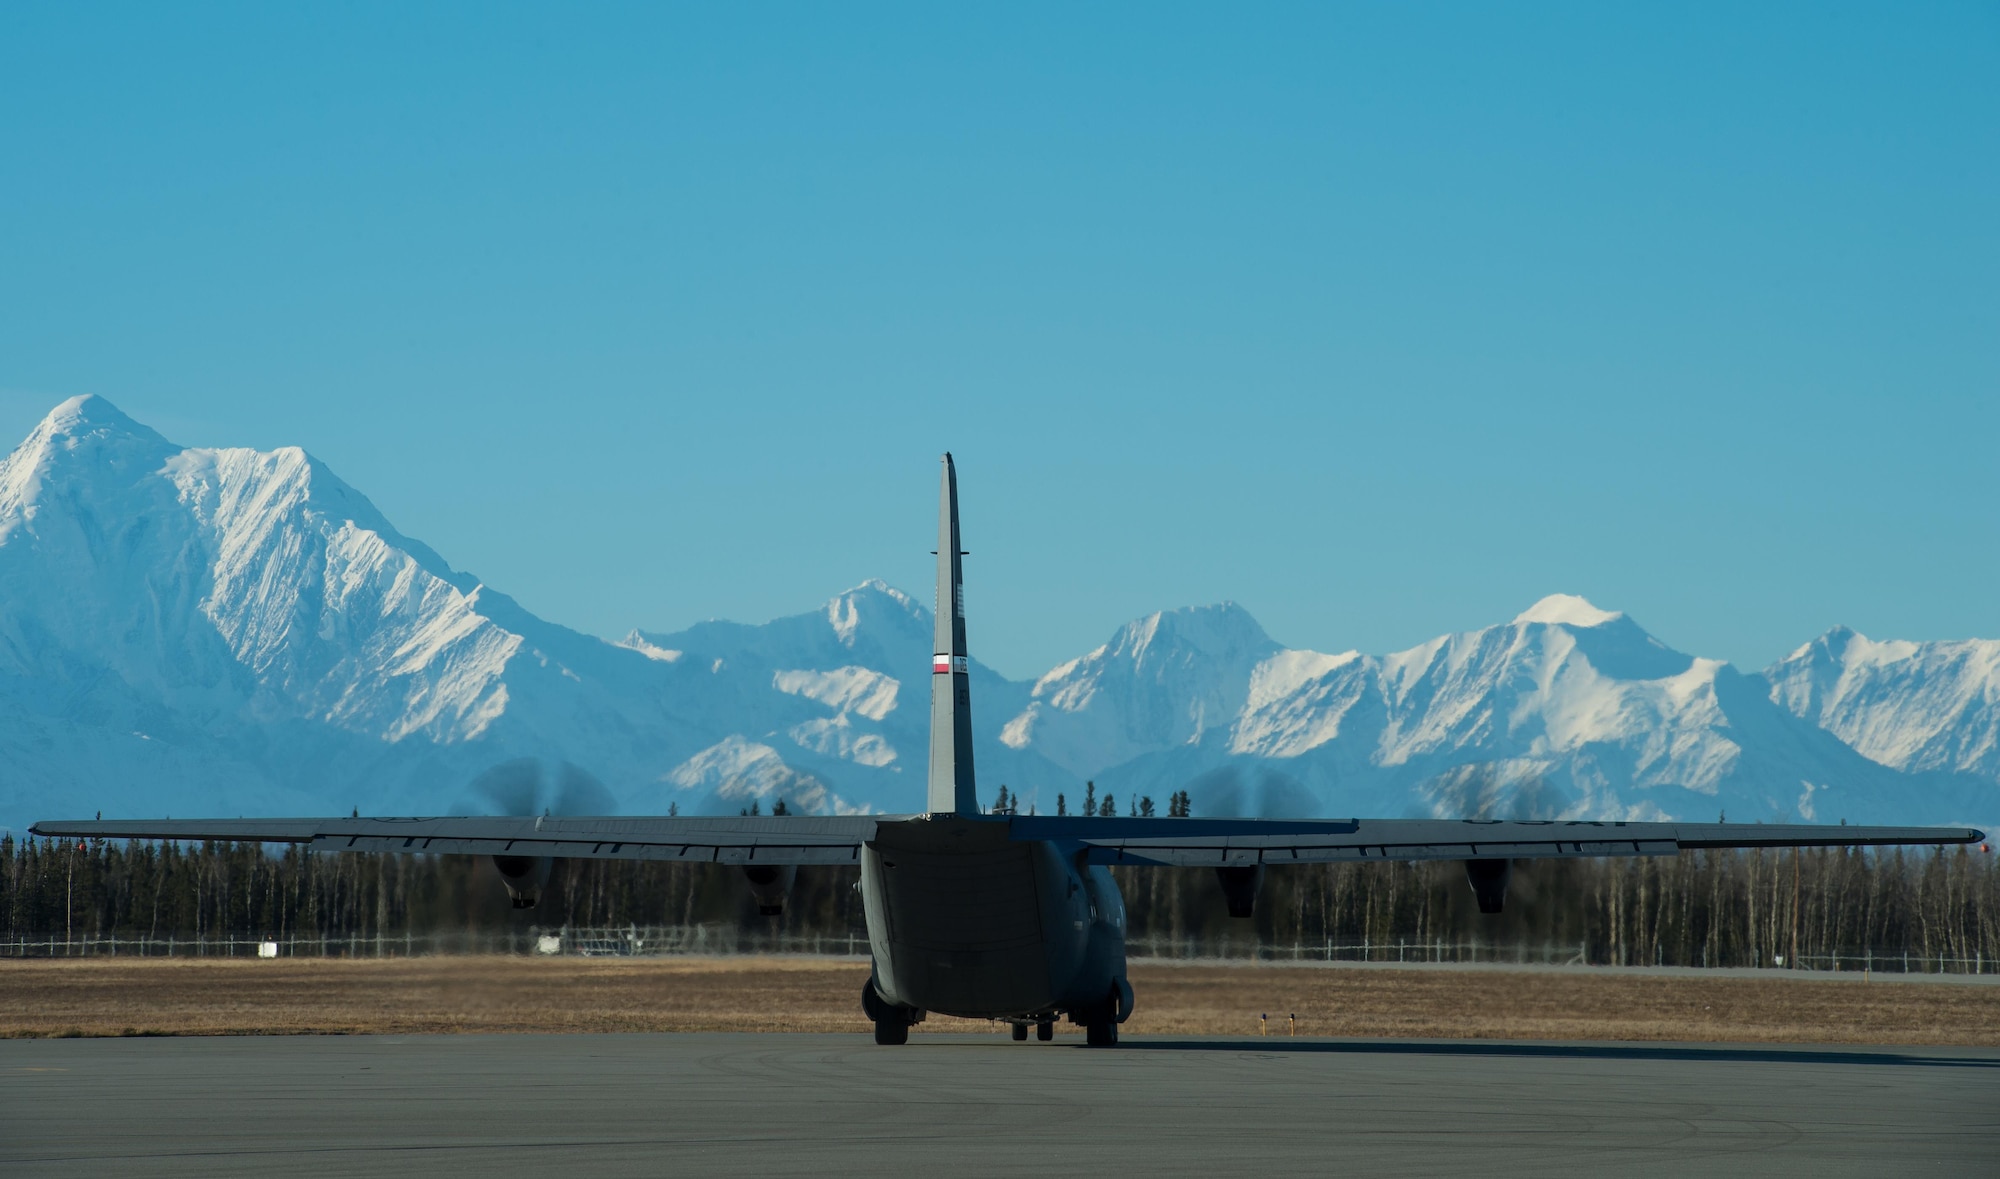 A U.S. Air Force C-130J Super Hercules aircraft from Dyess Air Force Base, Texas, taxis before taking off from Allen Army Airfield, Alaska during exercise RED FLAG-Alaska 17-1, Oct. 13, 2016. RF-A is a series of Pacific Air Forces commander-directed field training exercises for U.S. and partner nation forces, providing combined offensive counter-air, interdiction, close air support, and large force employment training in a simulated combat environment. (U.S. Air Force photo by Master Sgt. Joseph Swafford)